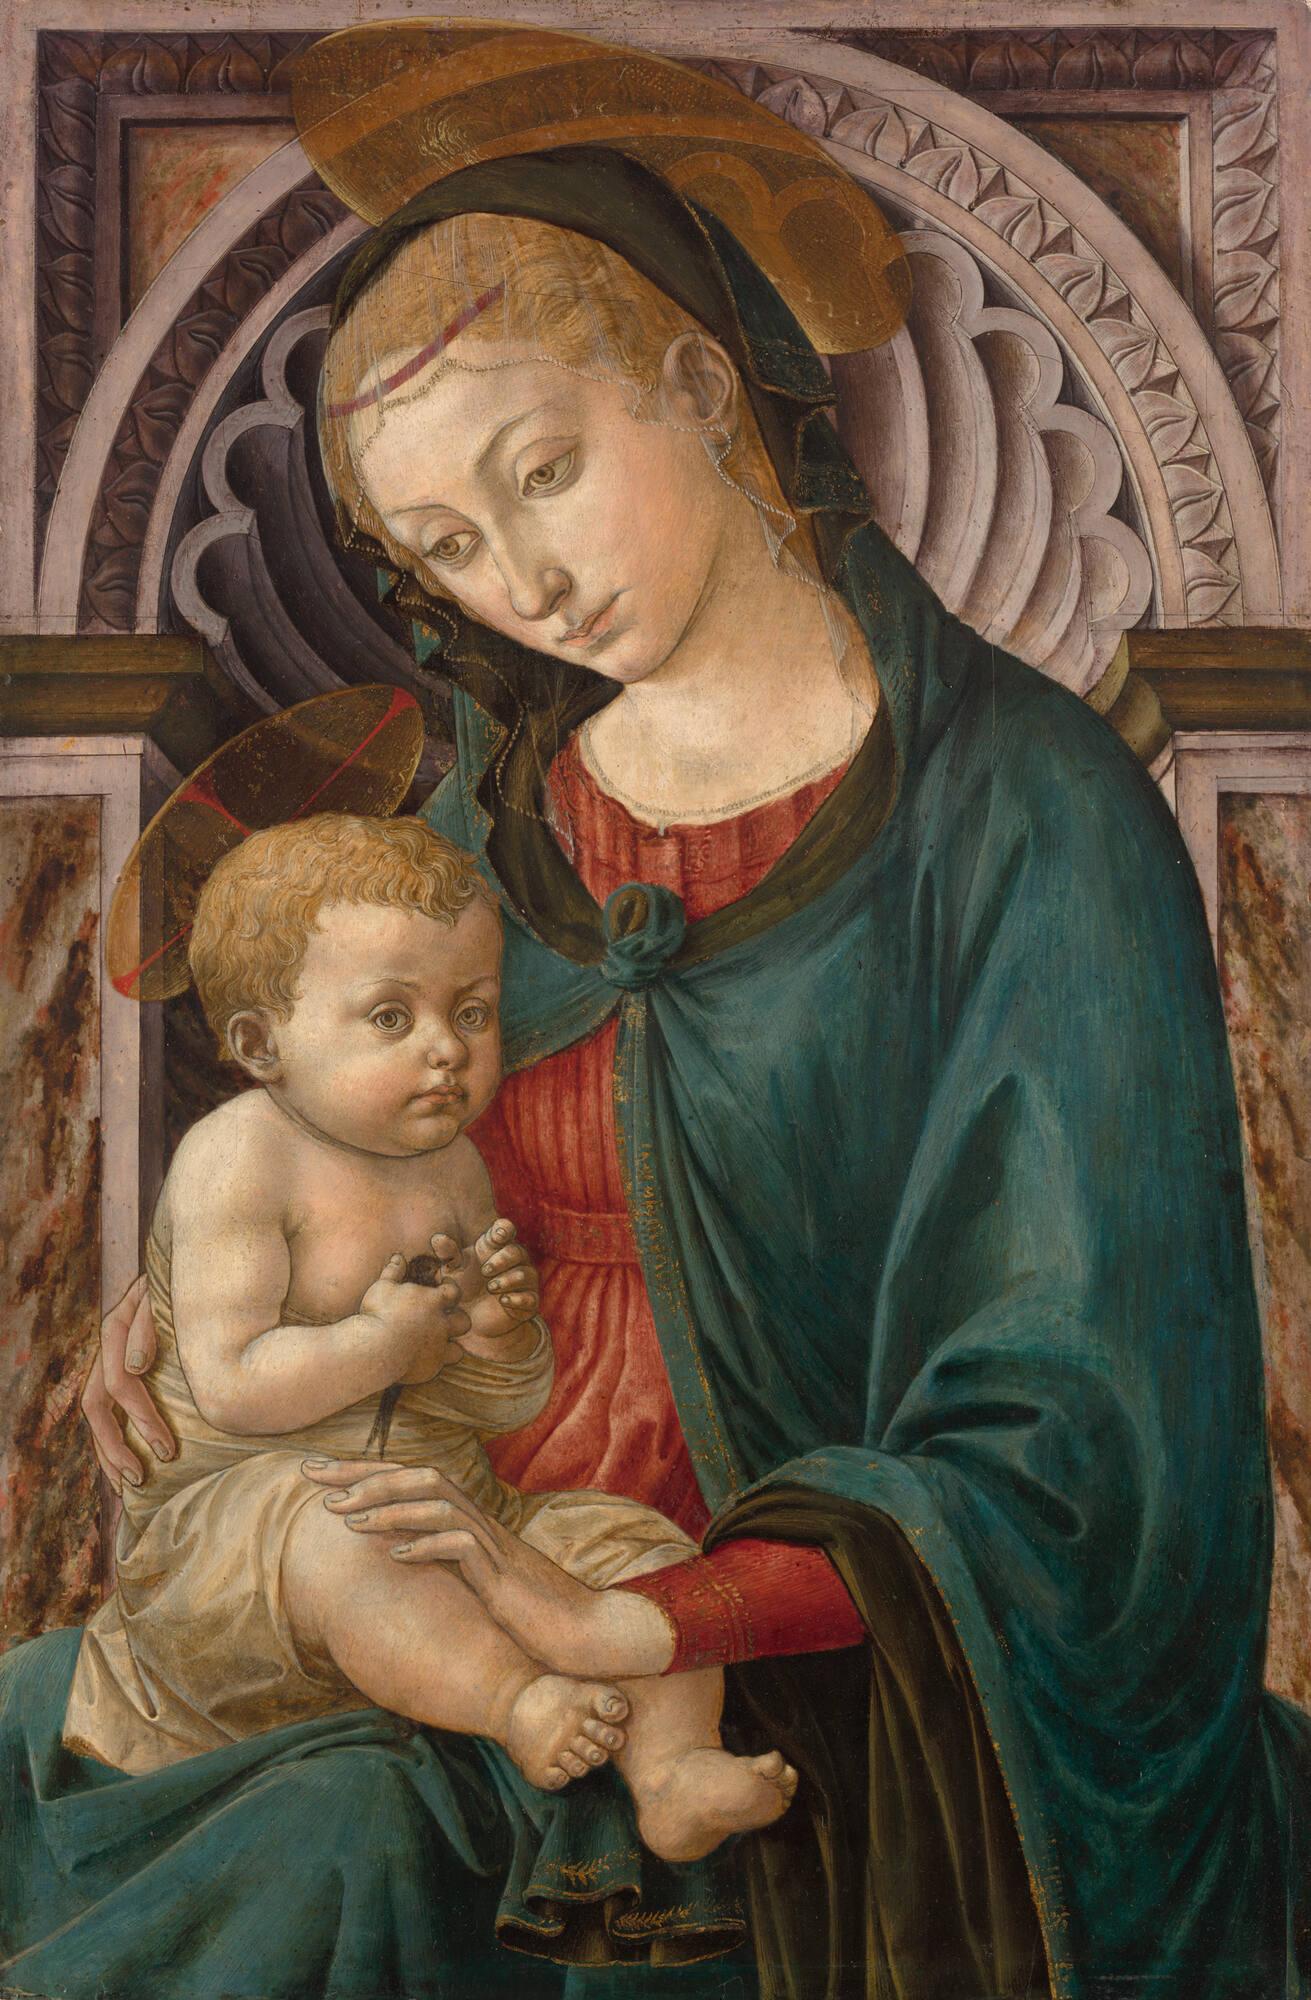 (Florence, about 1422 - 1457, Florence)